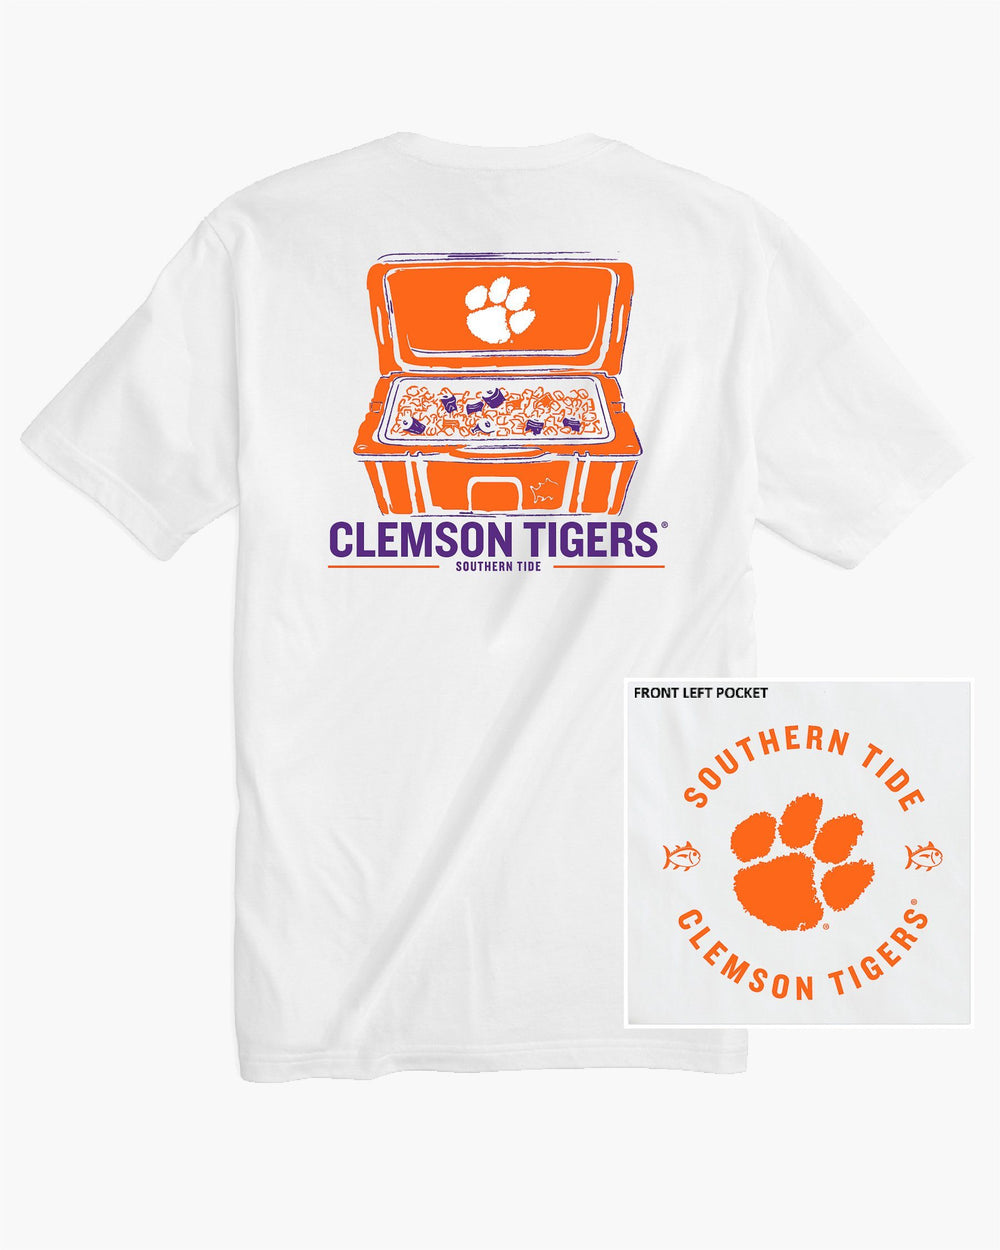 The back of the Men's Clemson Tigers Cooler Short Sleeve T-Shirt - Classic White